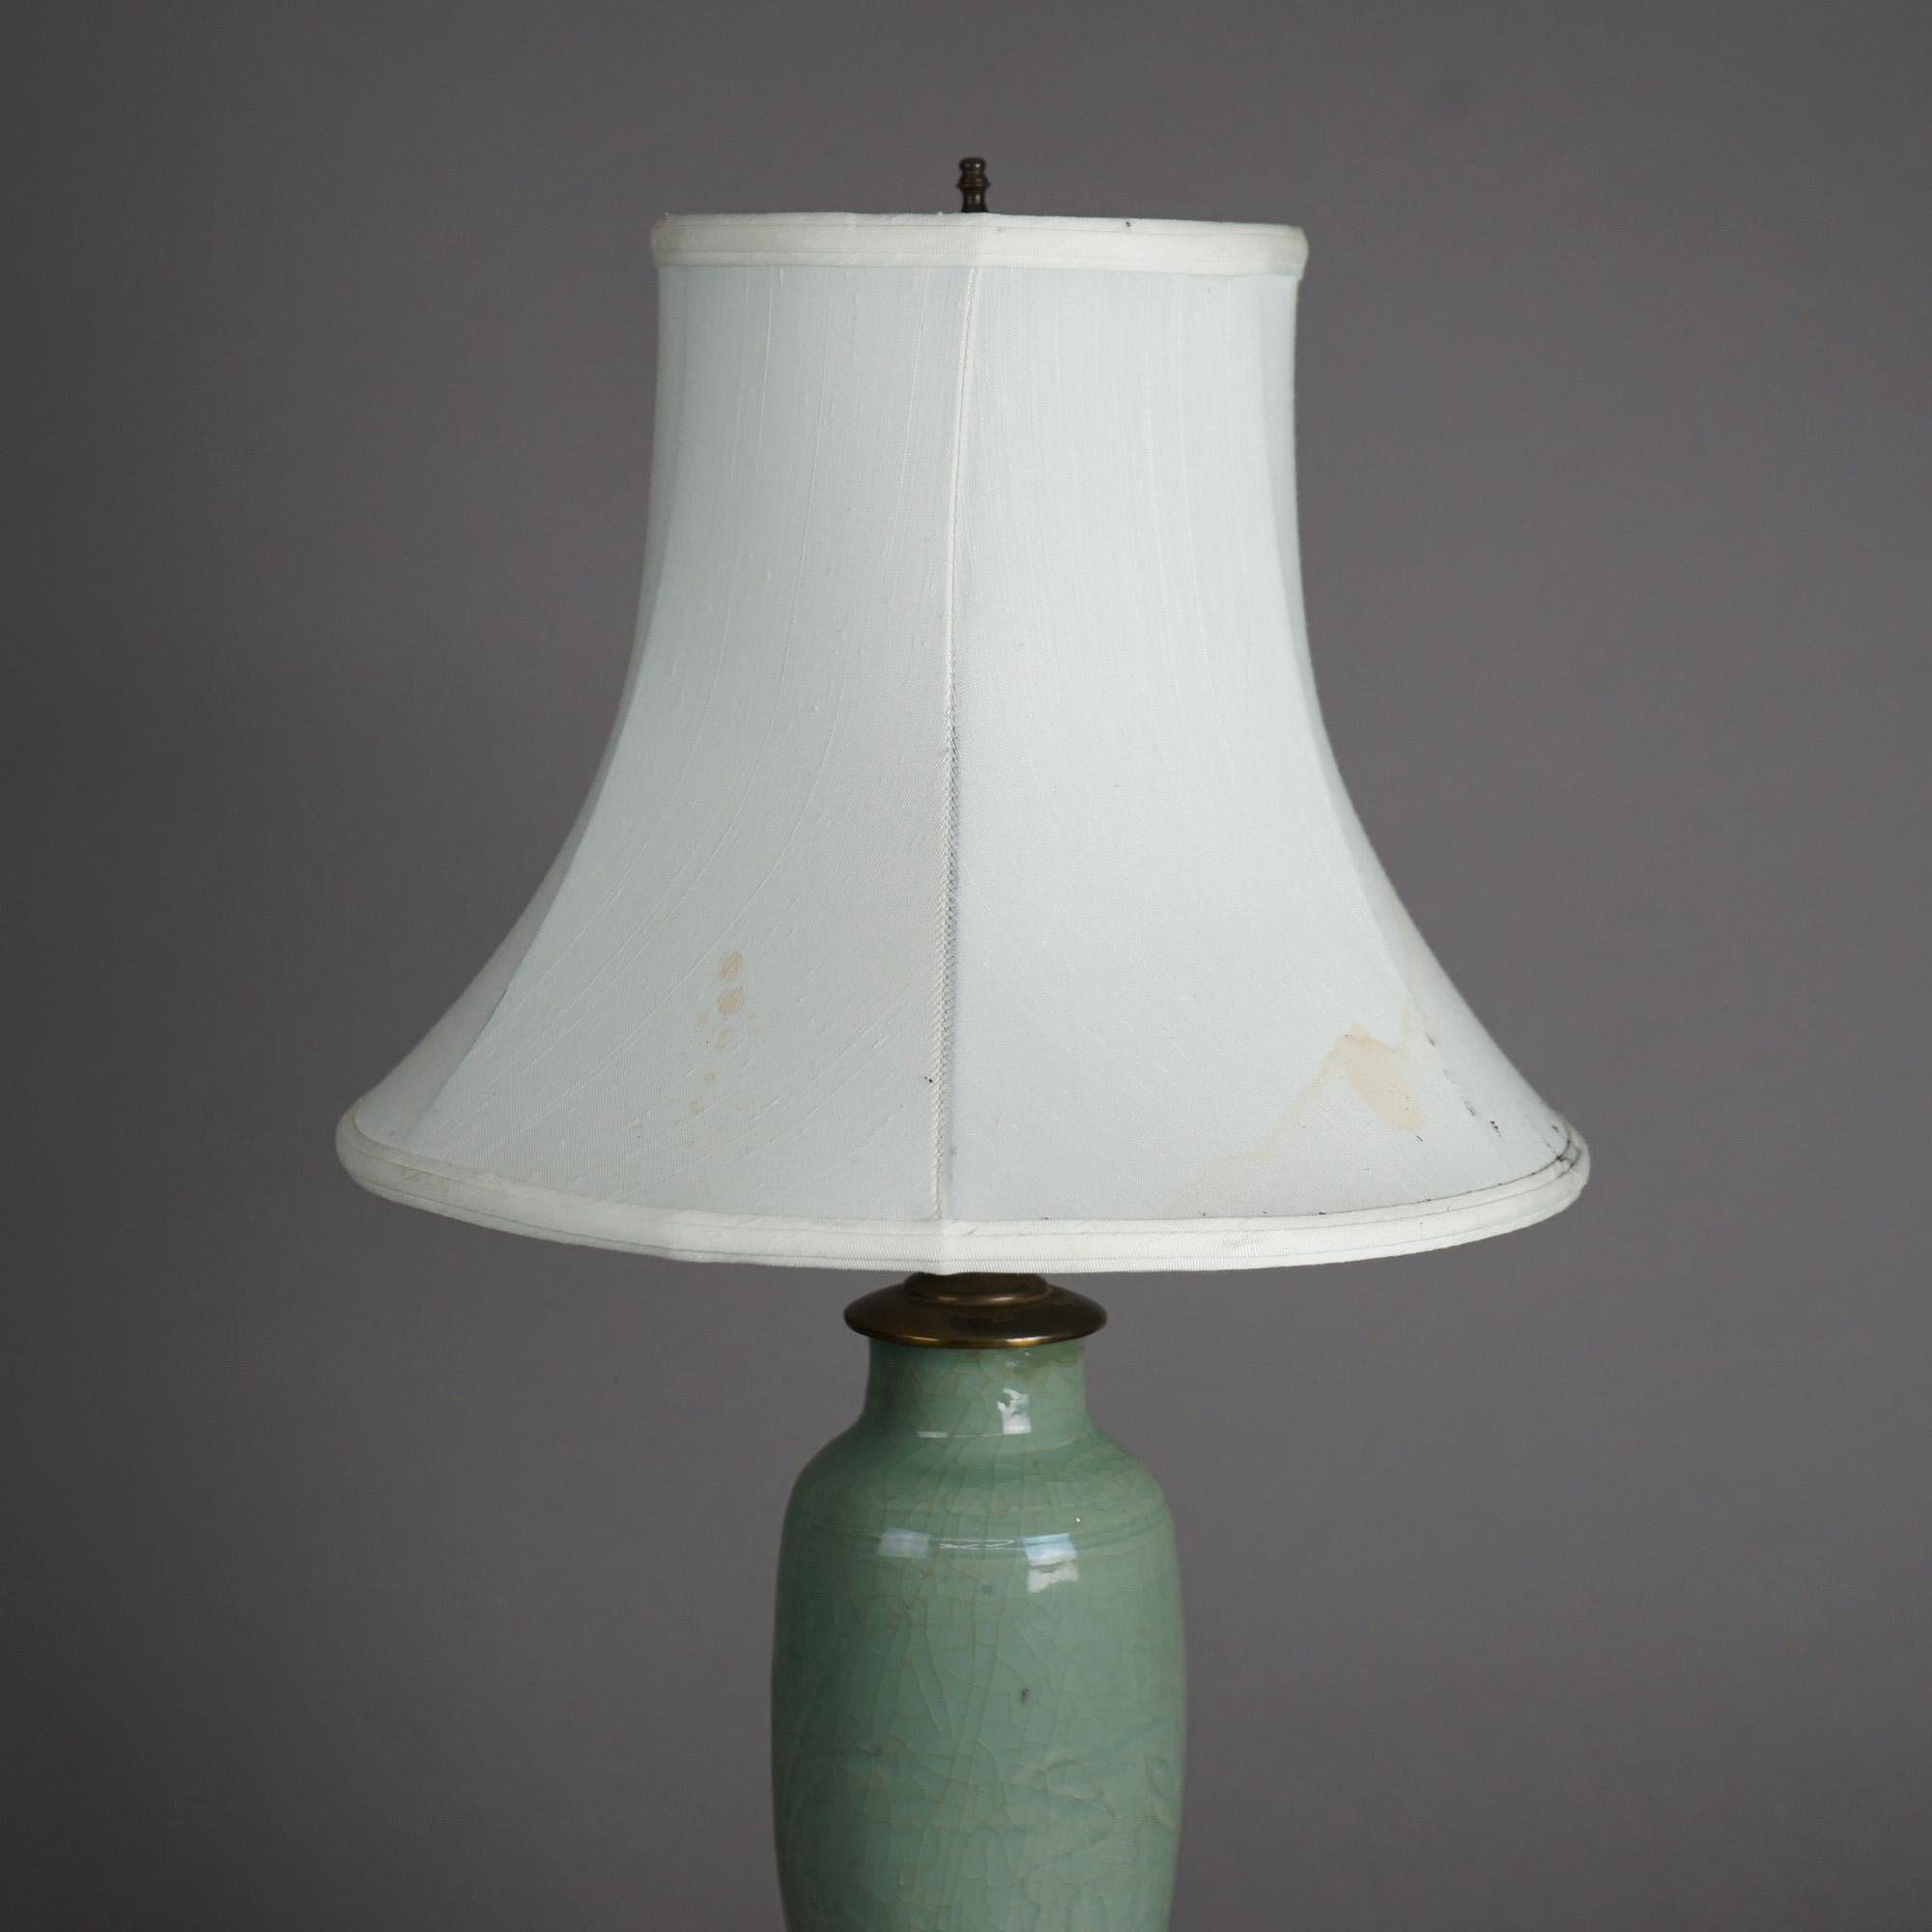 American Antique Chinese Celadon Glazed Art Pottery Table Lamp C1930